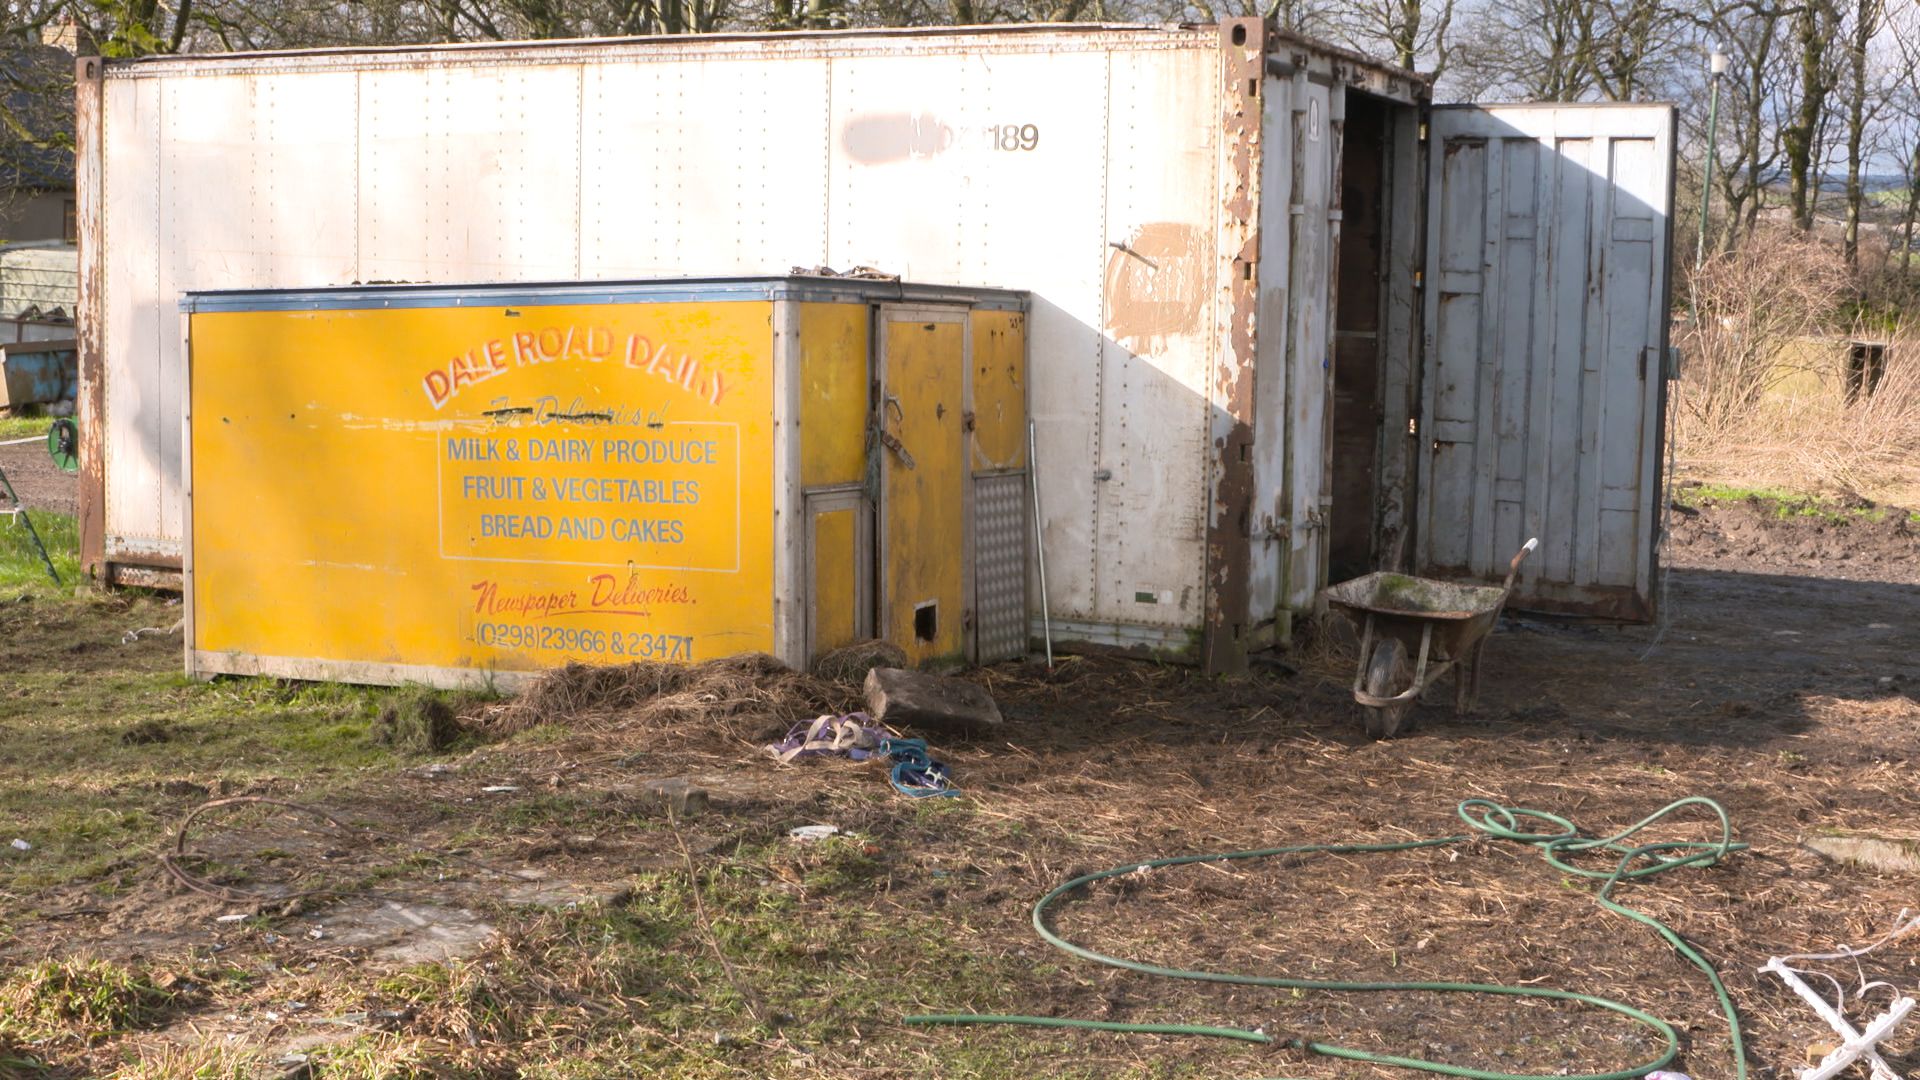 The containers where the ponies were kept - feb 2016